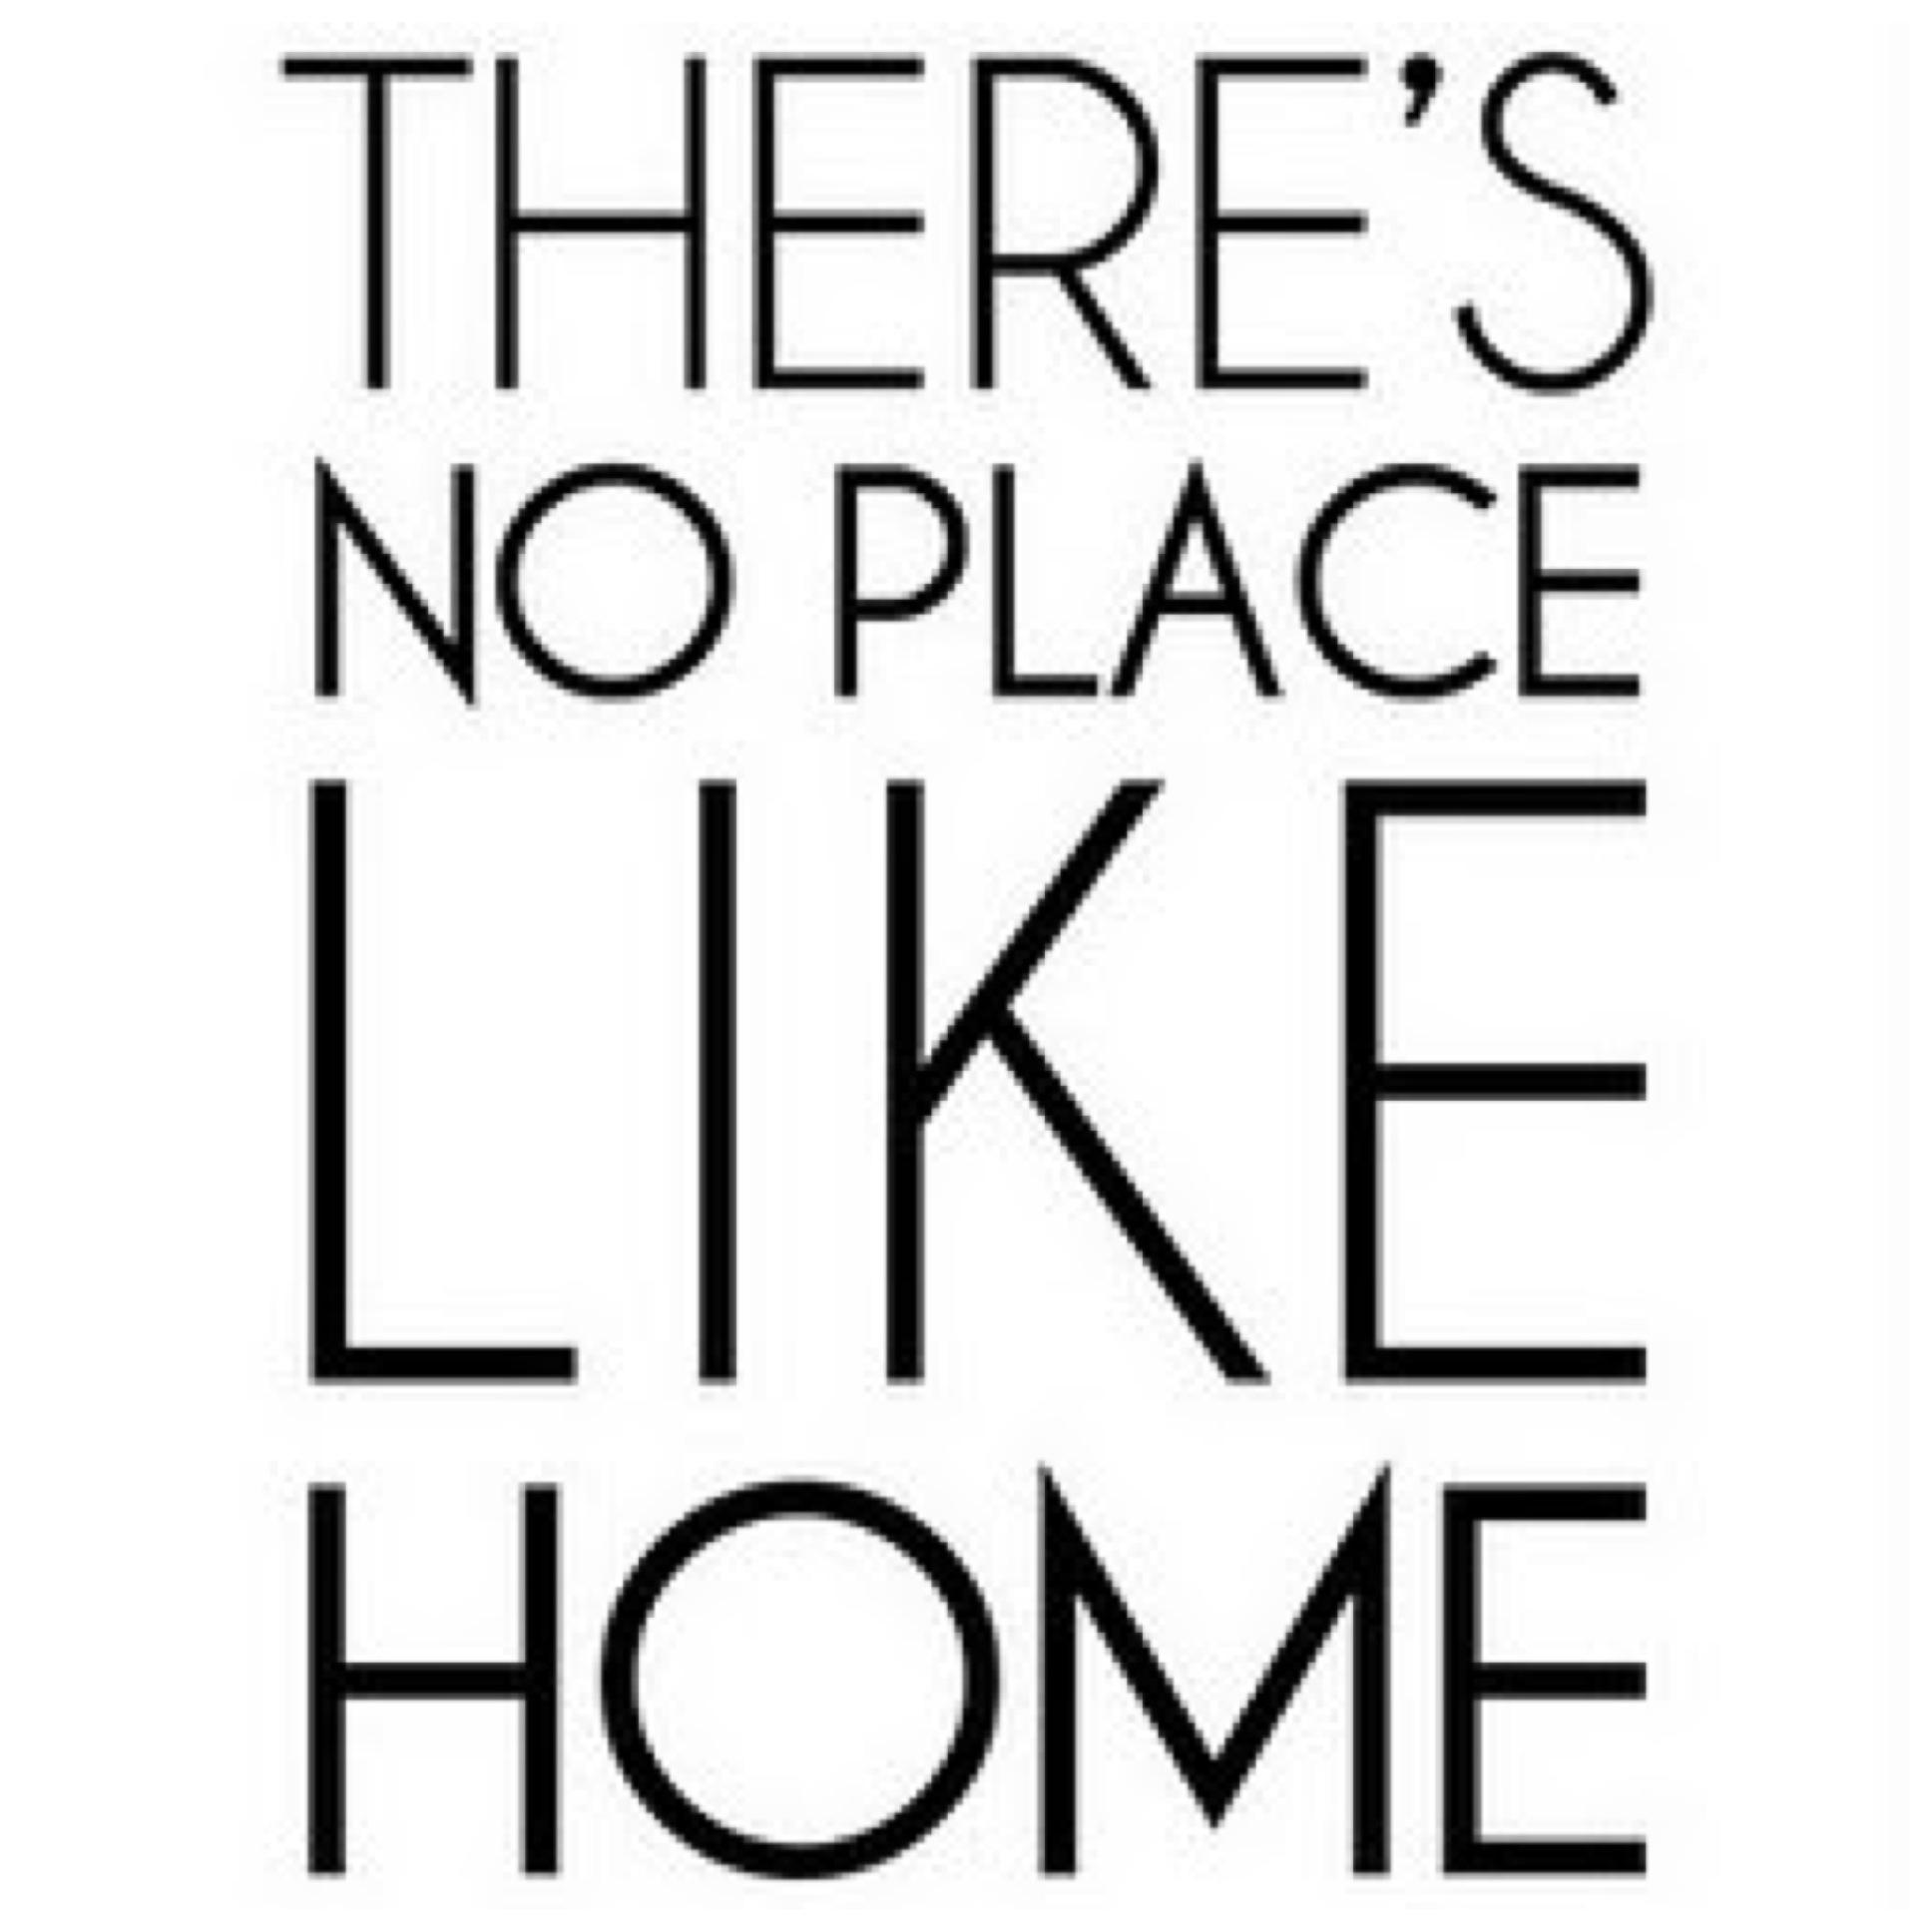 1936x1936px Home Sweet Home 503.81 KB